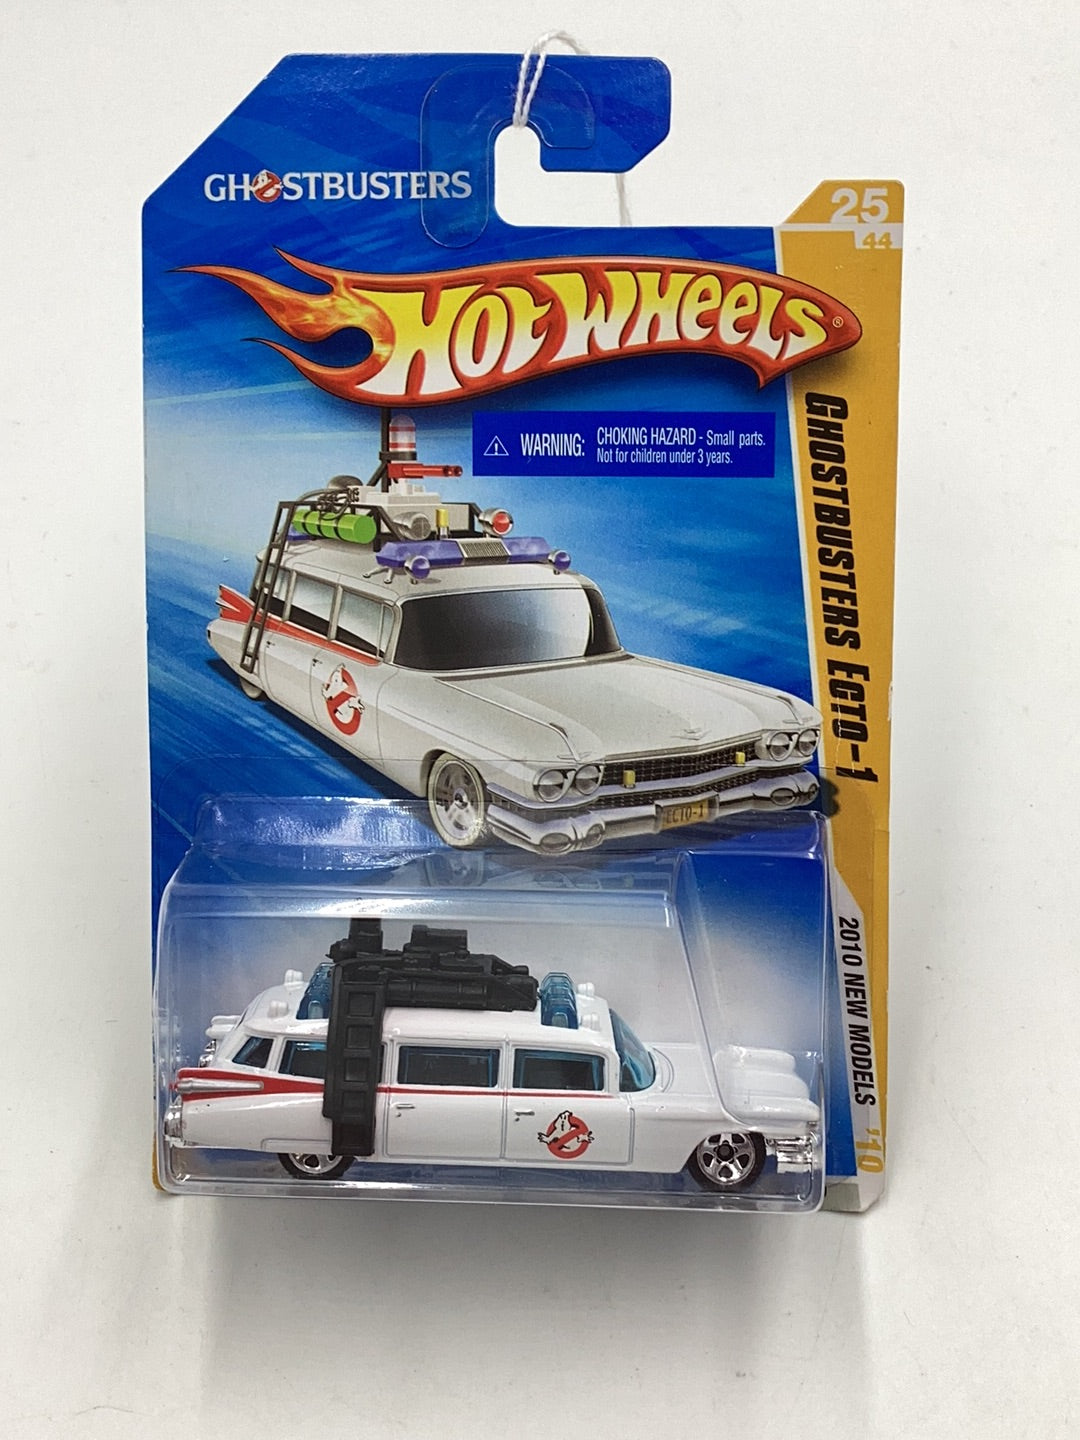 2010 Hot Wheels #25 Ghostbusters ecto-1 new models 121C